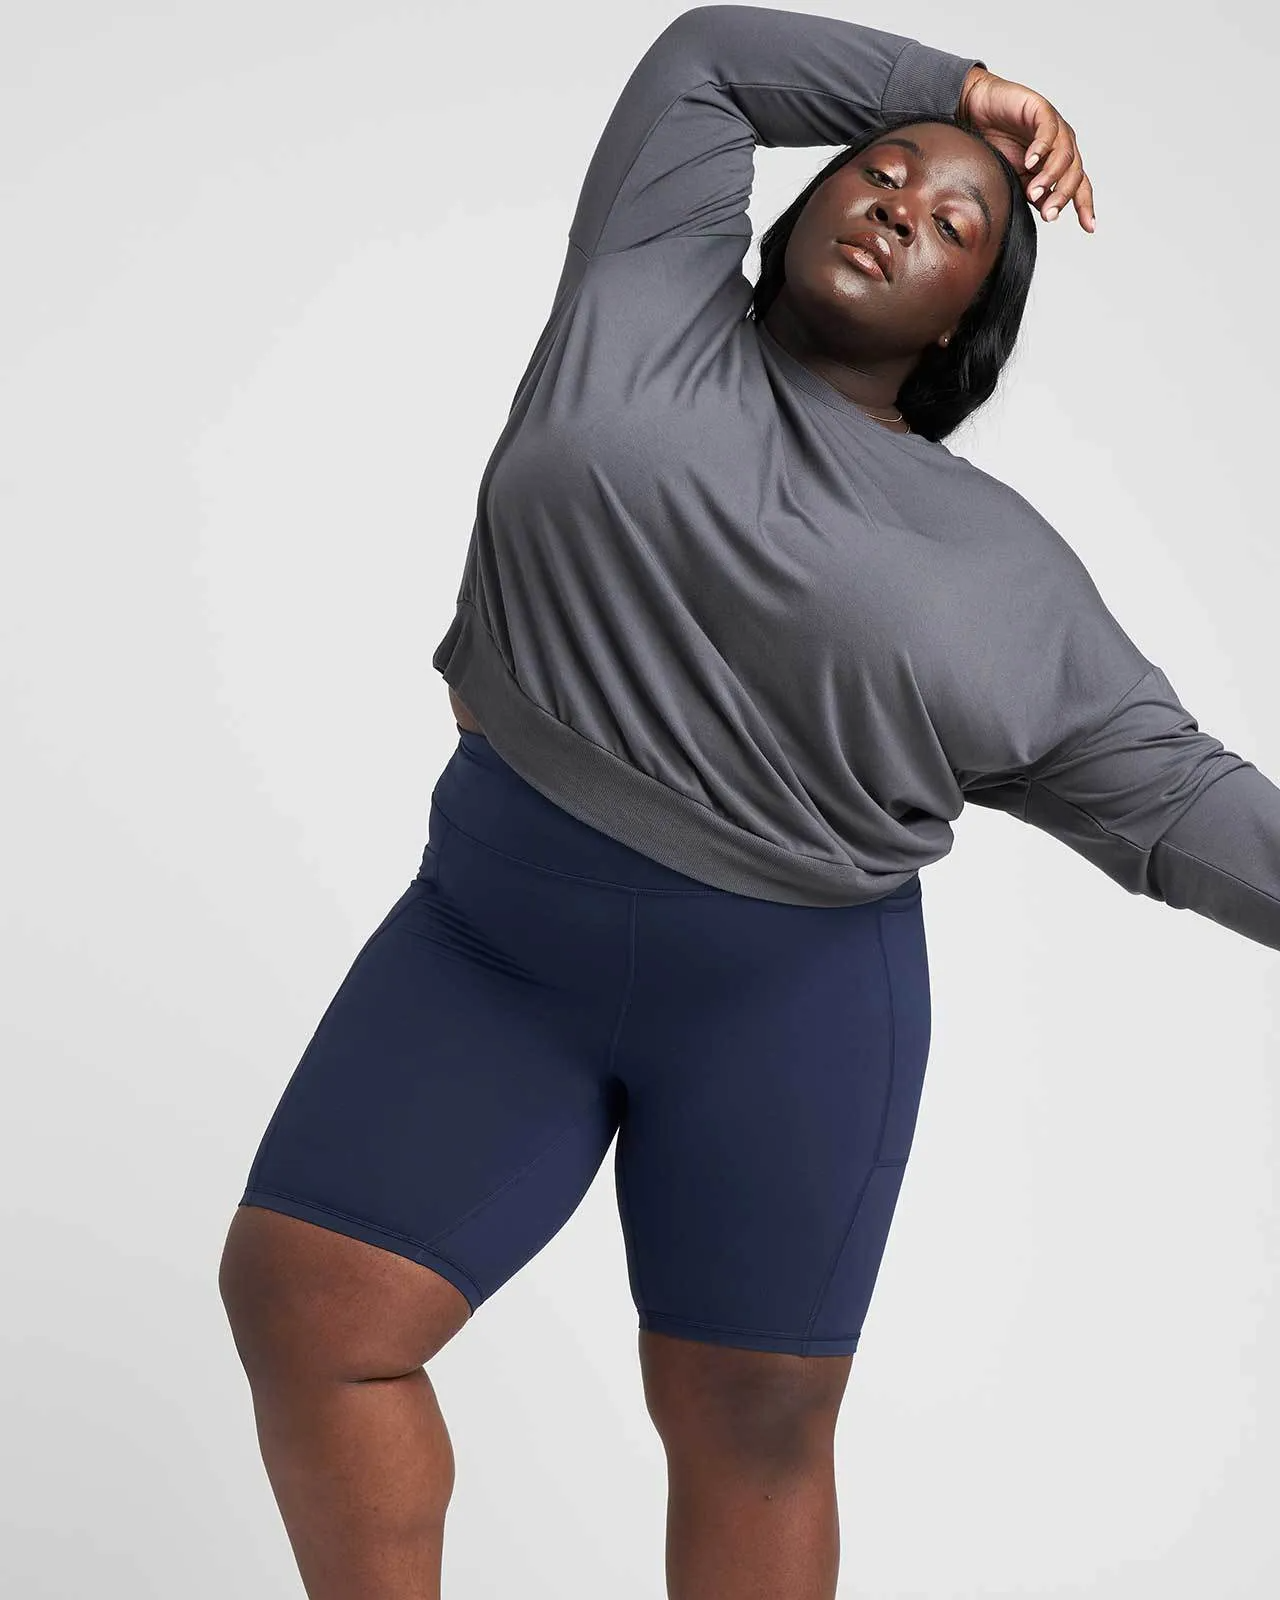 The Best Brands For Plus-Size Activewear - The Mom Edit